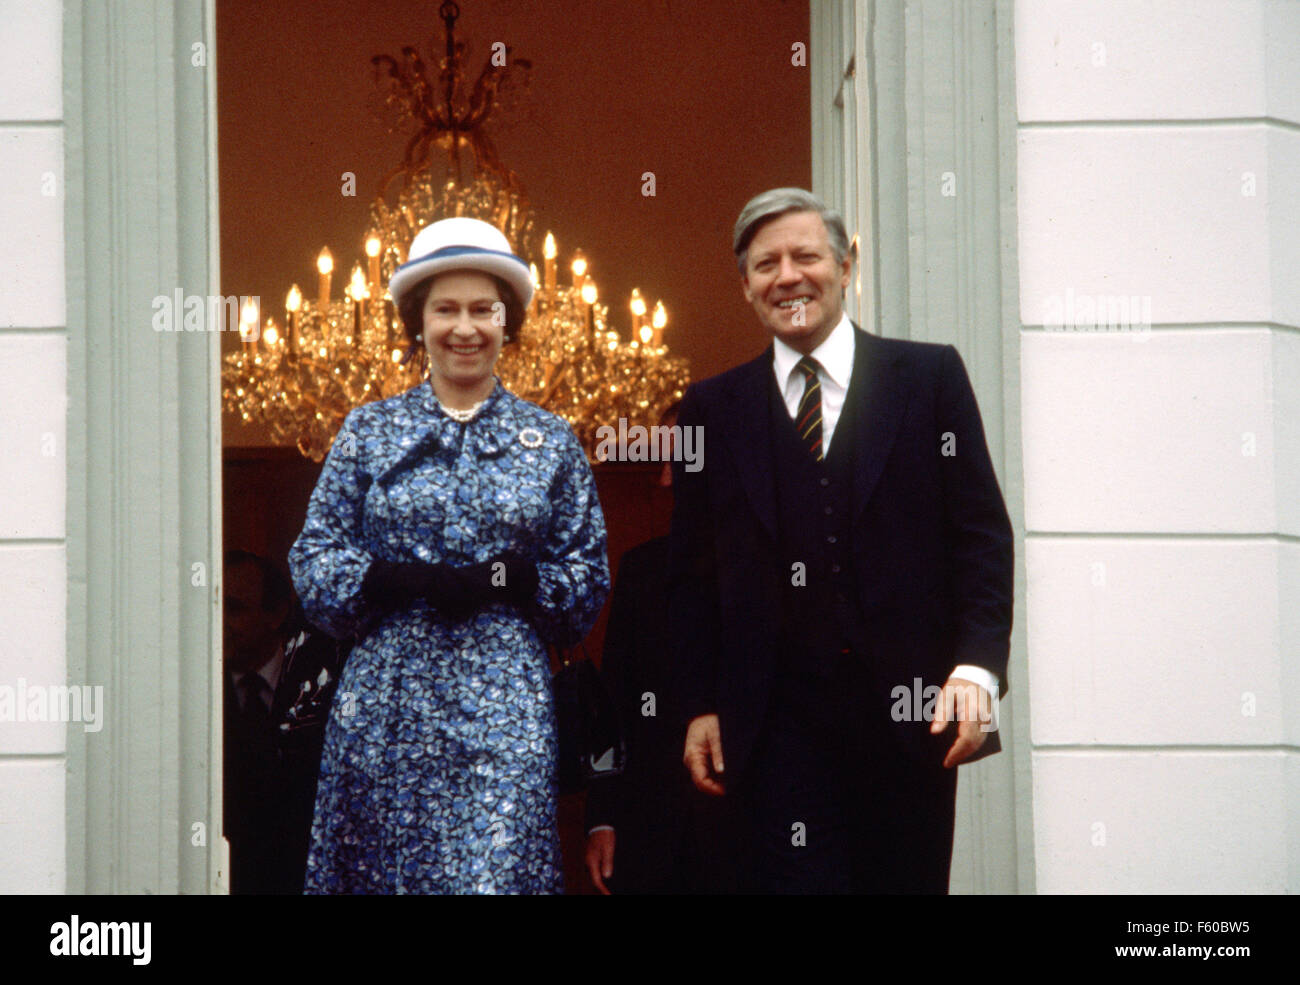 Queen Elizabeth II and Chancellor Helmut Schmidt on the terrace of Palais  Schaumburg in Bonn on 23 May 1978 Stock Photo - Alamy